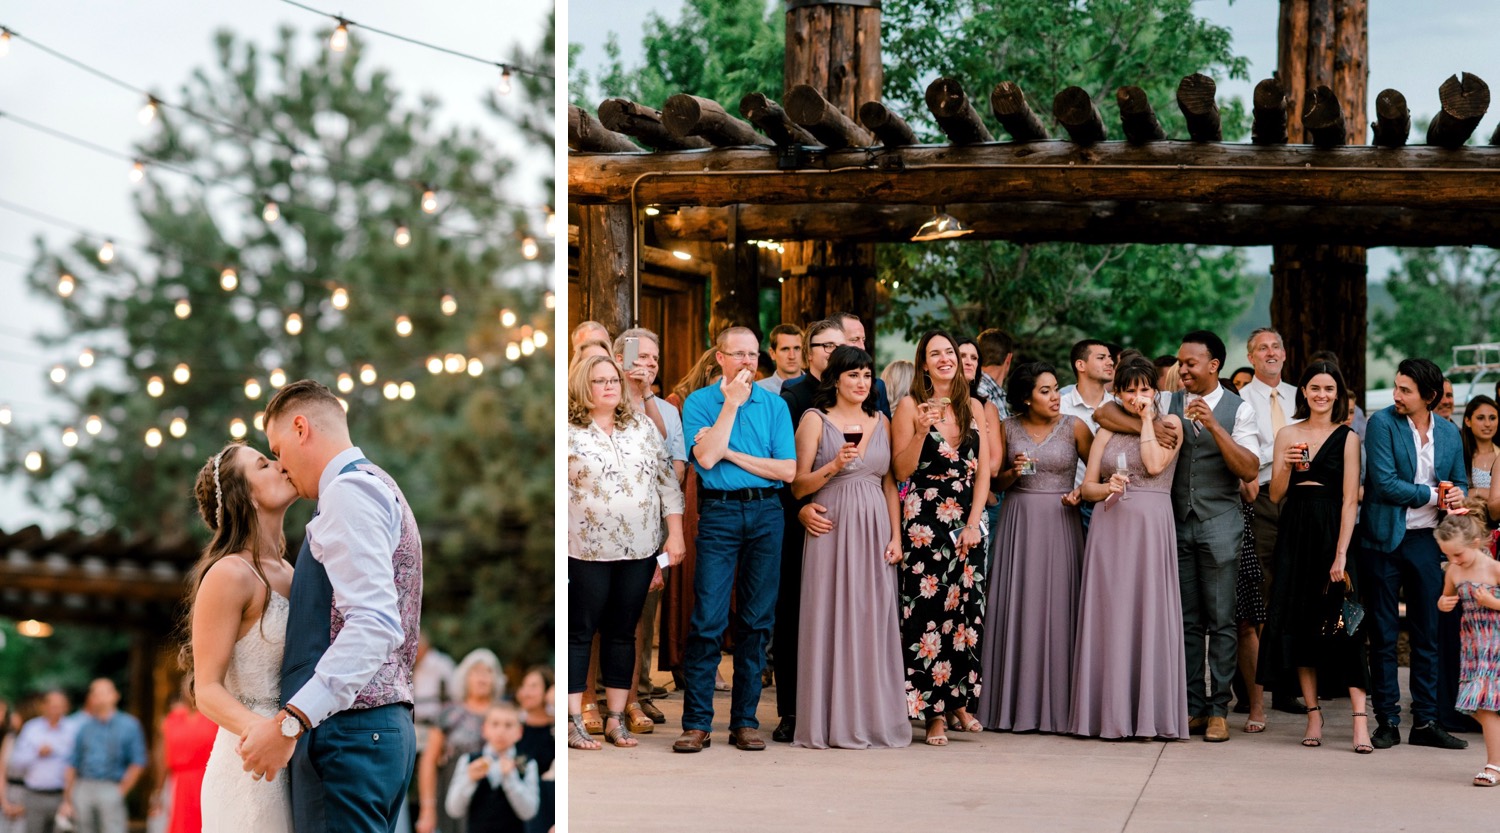 Kristen and Charlton's guests watch as they have their first dances outdoors at Spruce Mountain Ranch in Larkspur, Colorado.